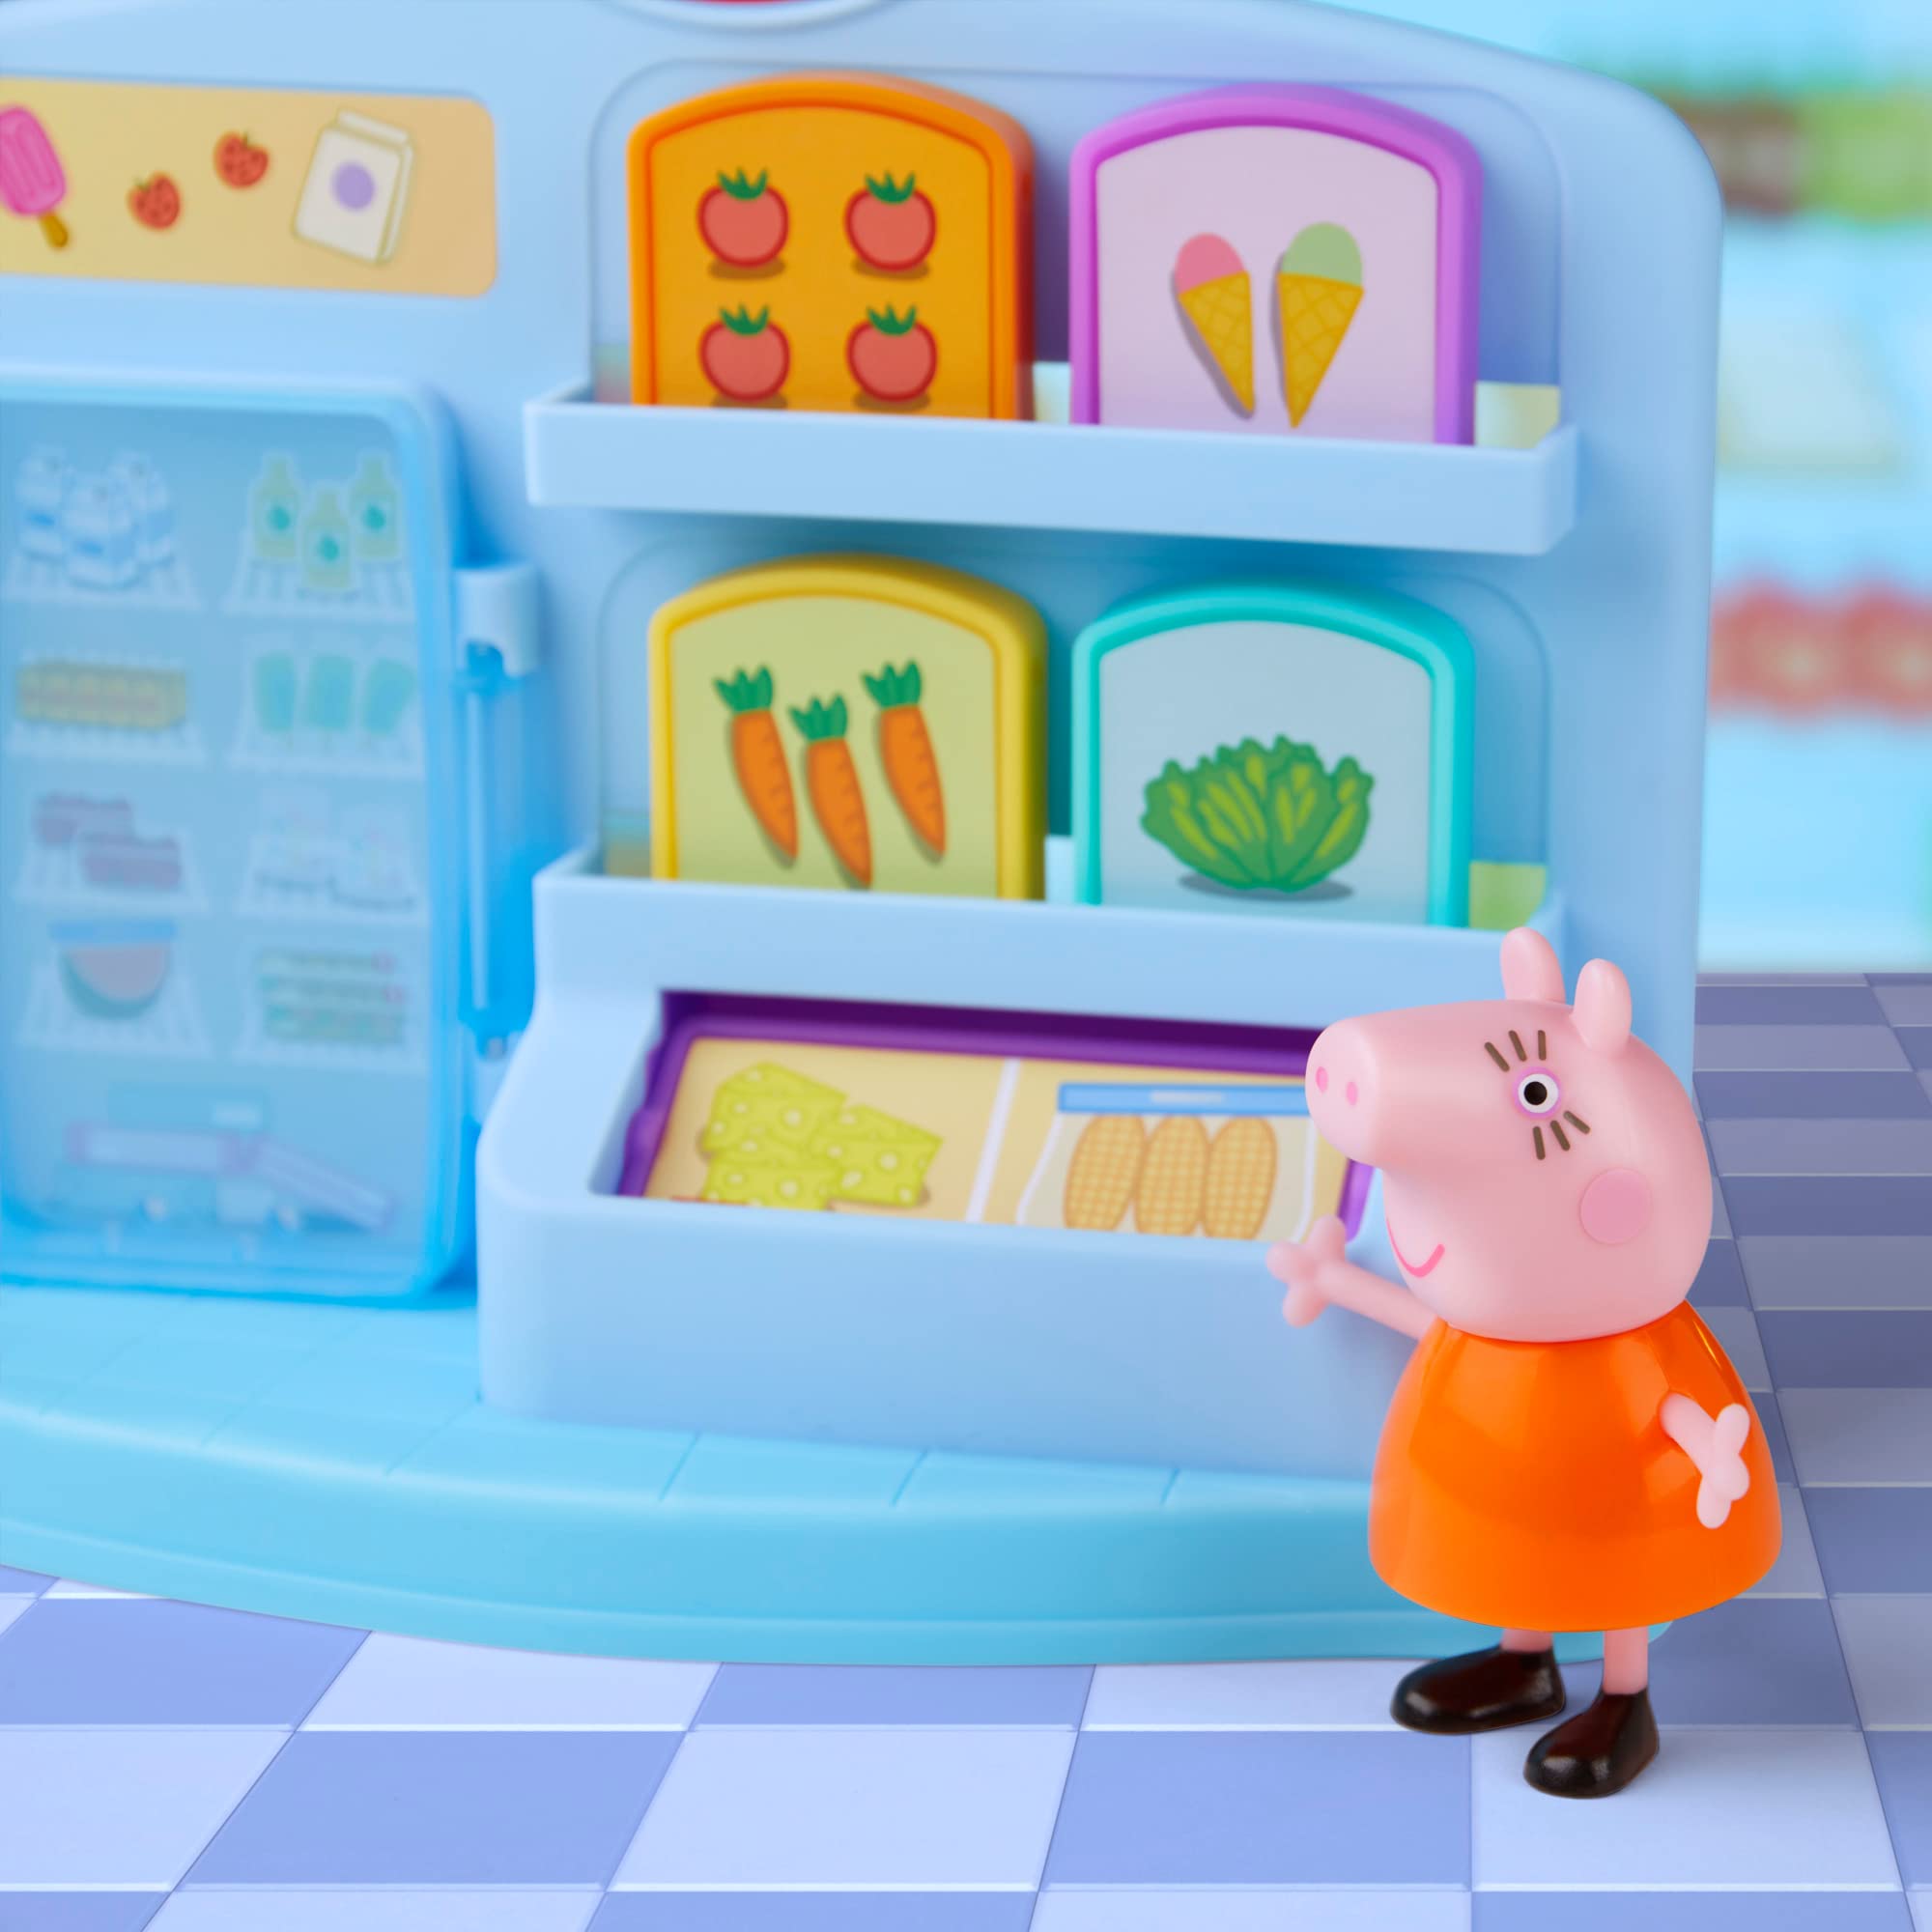 Peppa Pig Peppa’s Adventures Peppa’s Supermarket Playset Preschool Toy: Includes 2 Figures and 8 Themed Accessories; for Ages 3 and Up